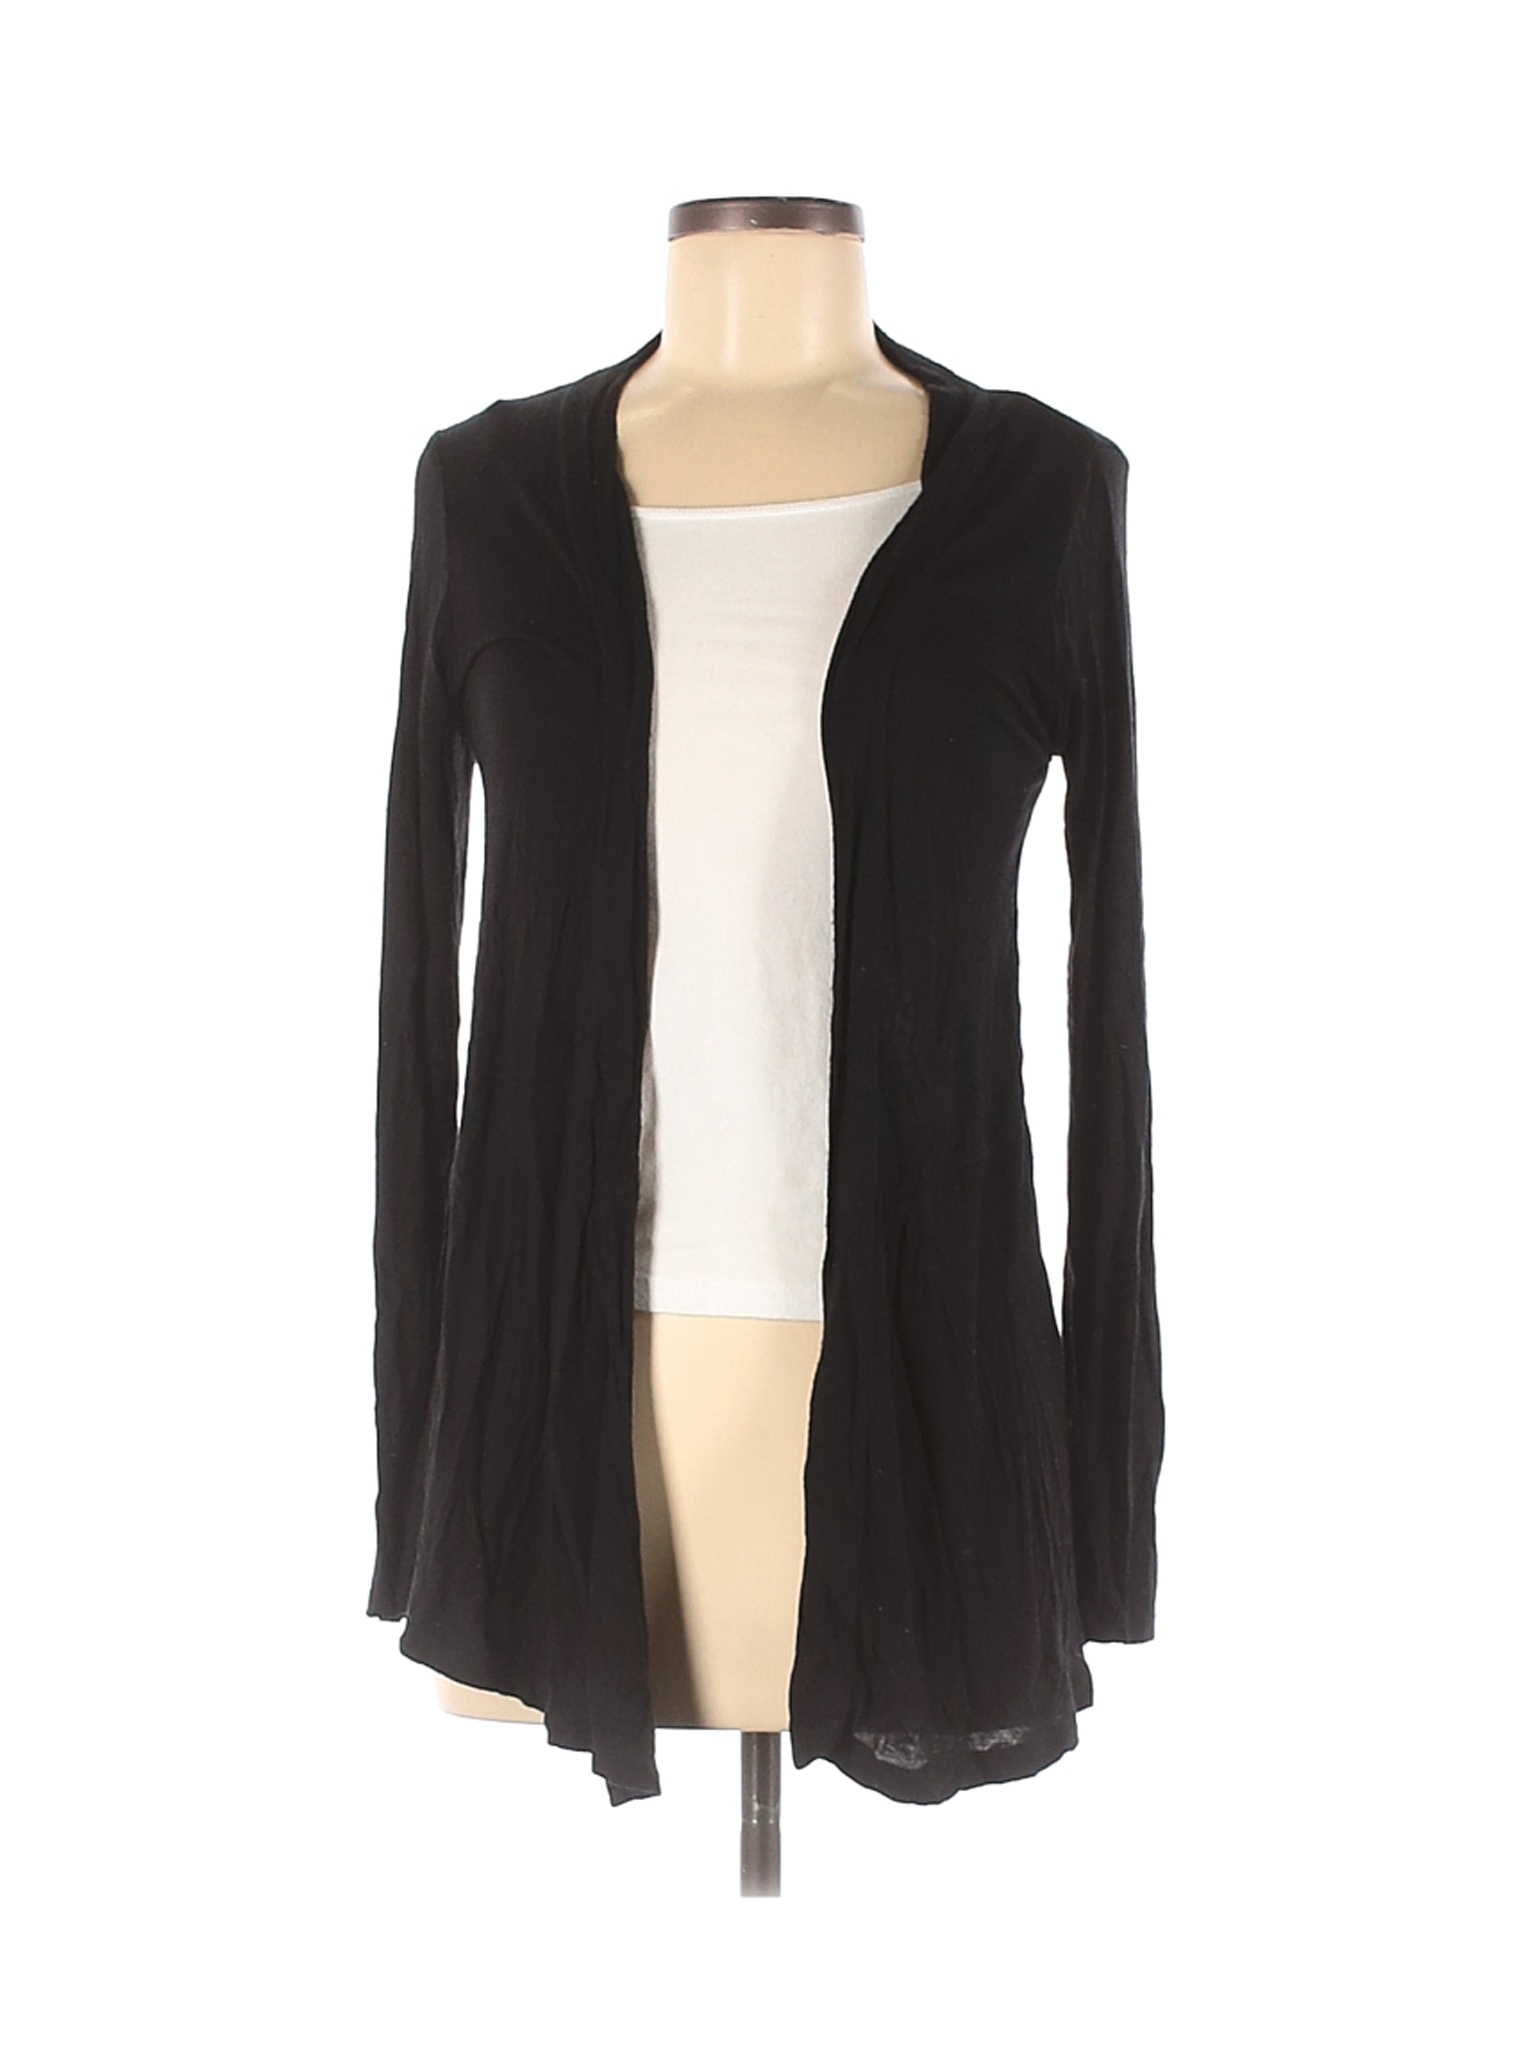 Zenana Outfitters Solid Black Cardigan Size M - 76% off | thredUP